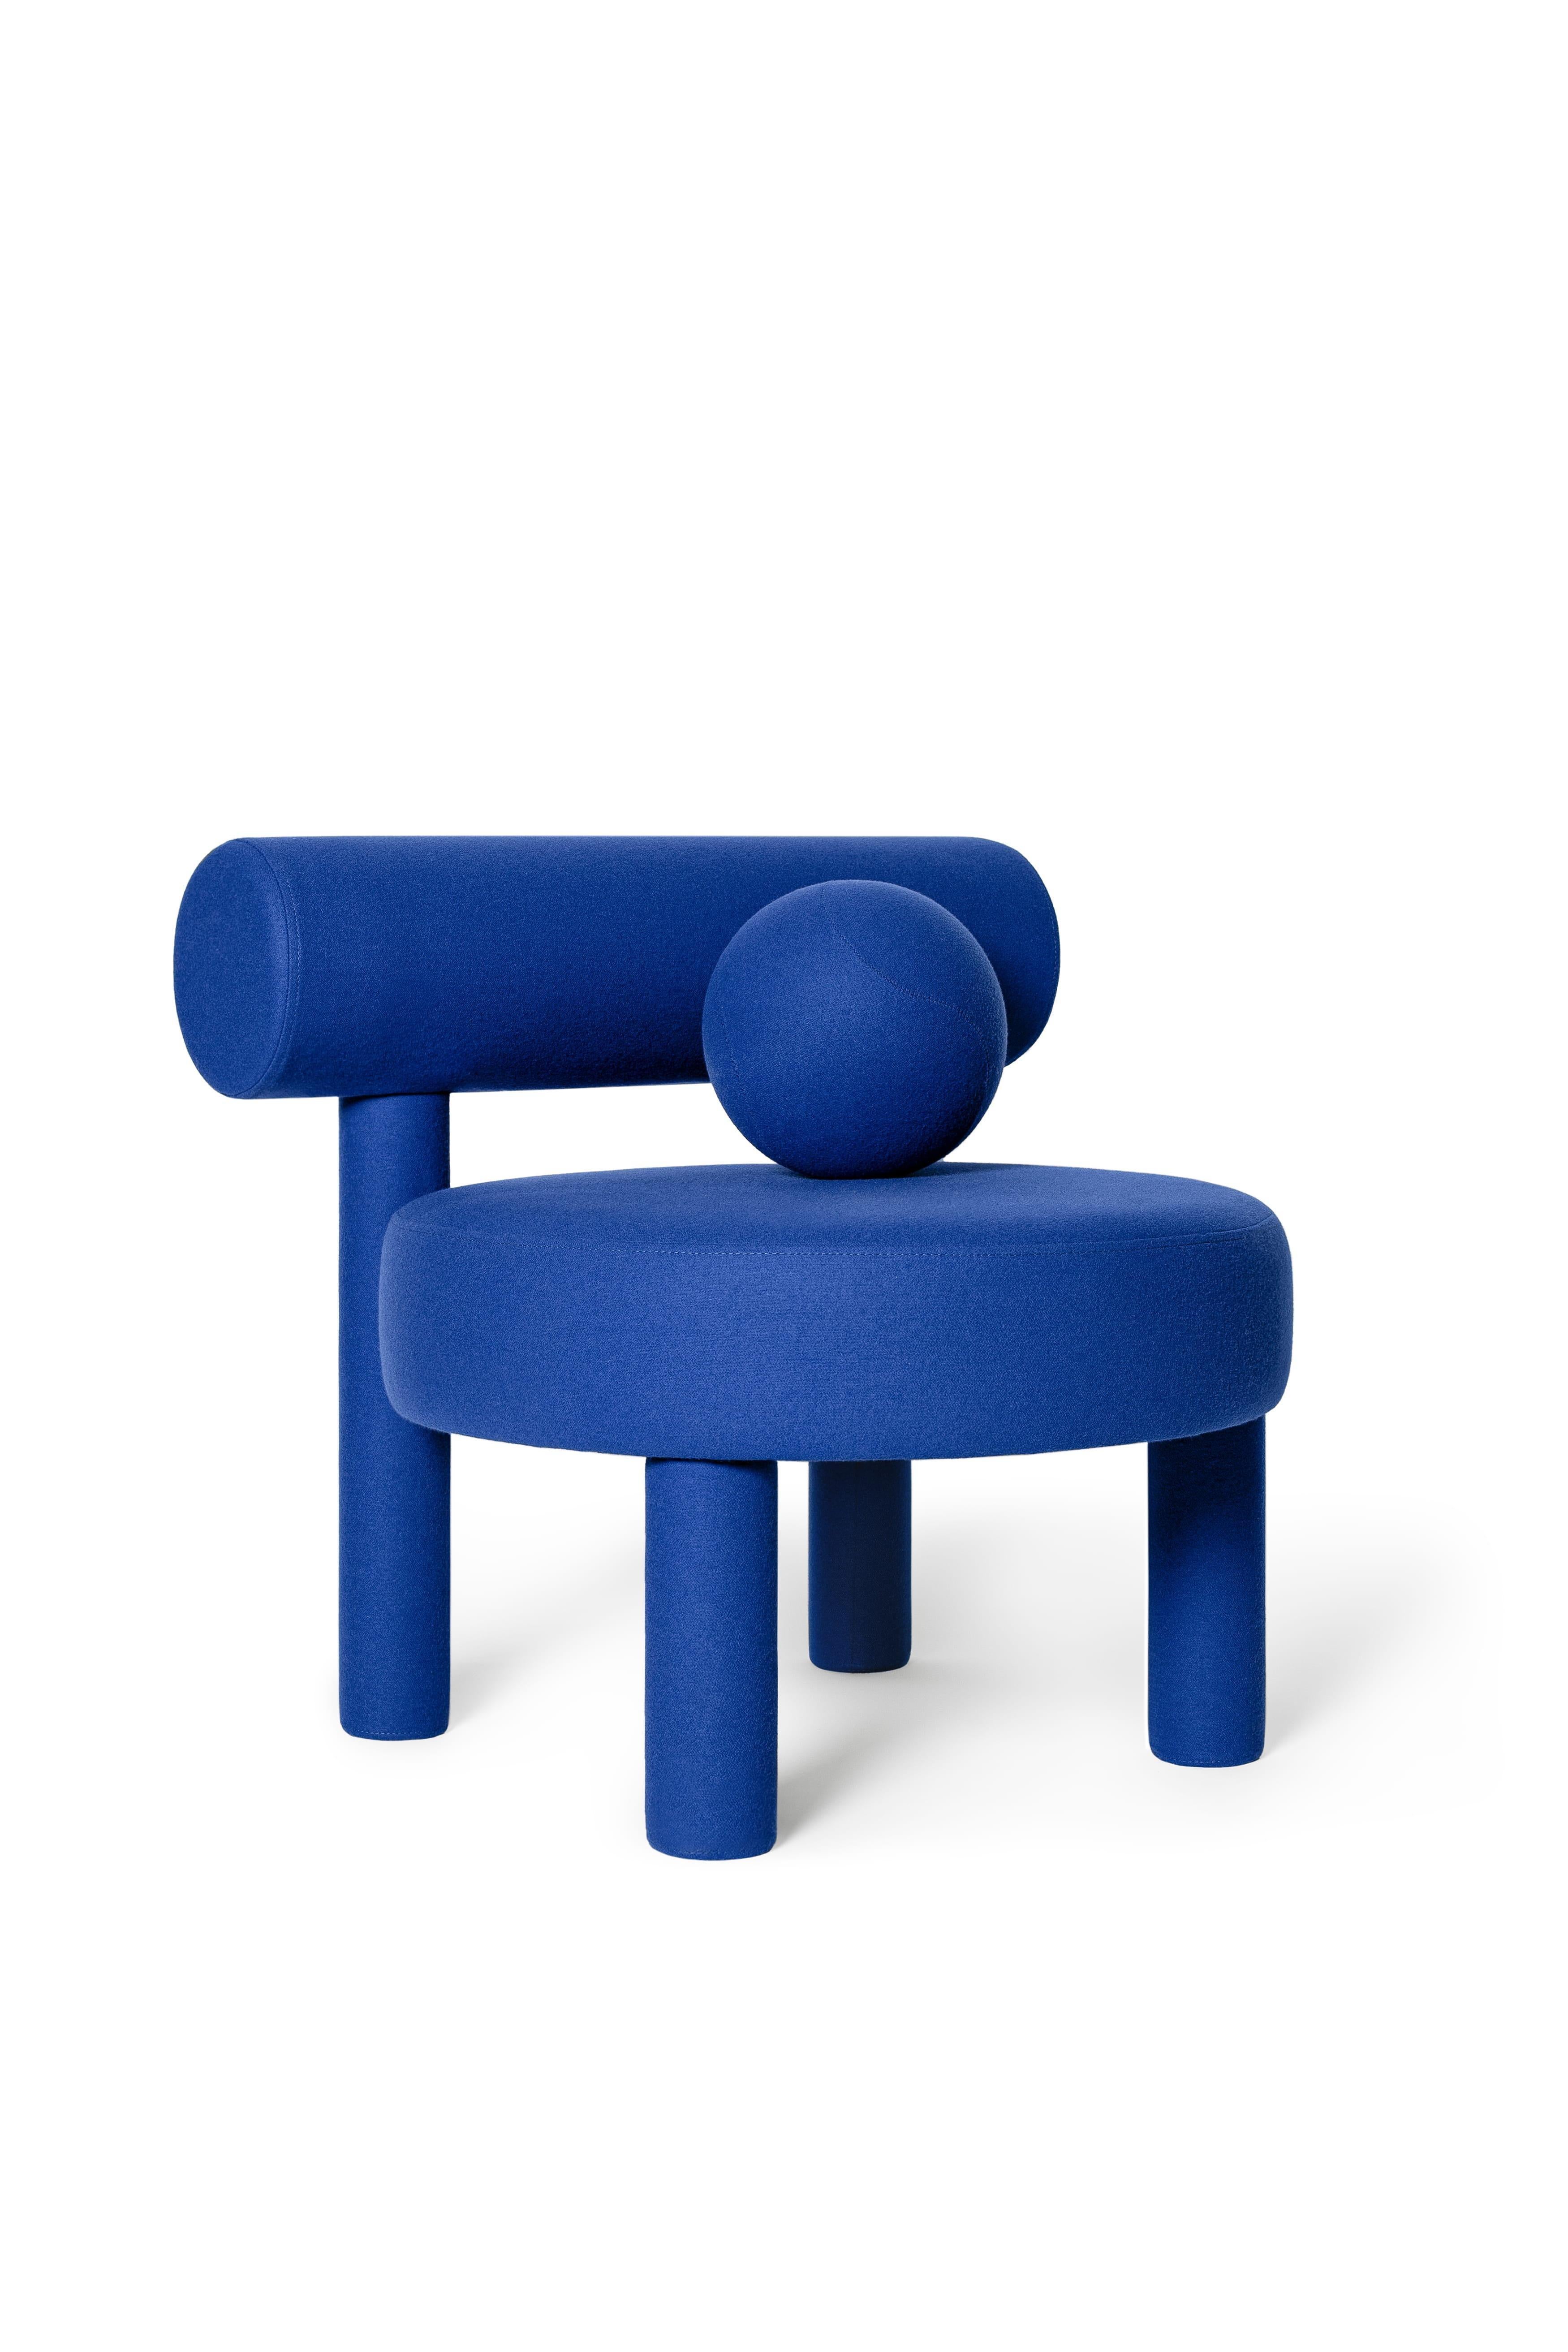 Contemporary Set 'Gropius CS1' by NOOM, 2 Low Chair in Wool Blue In New Condition For Sale In Paris, FR